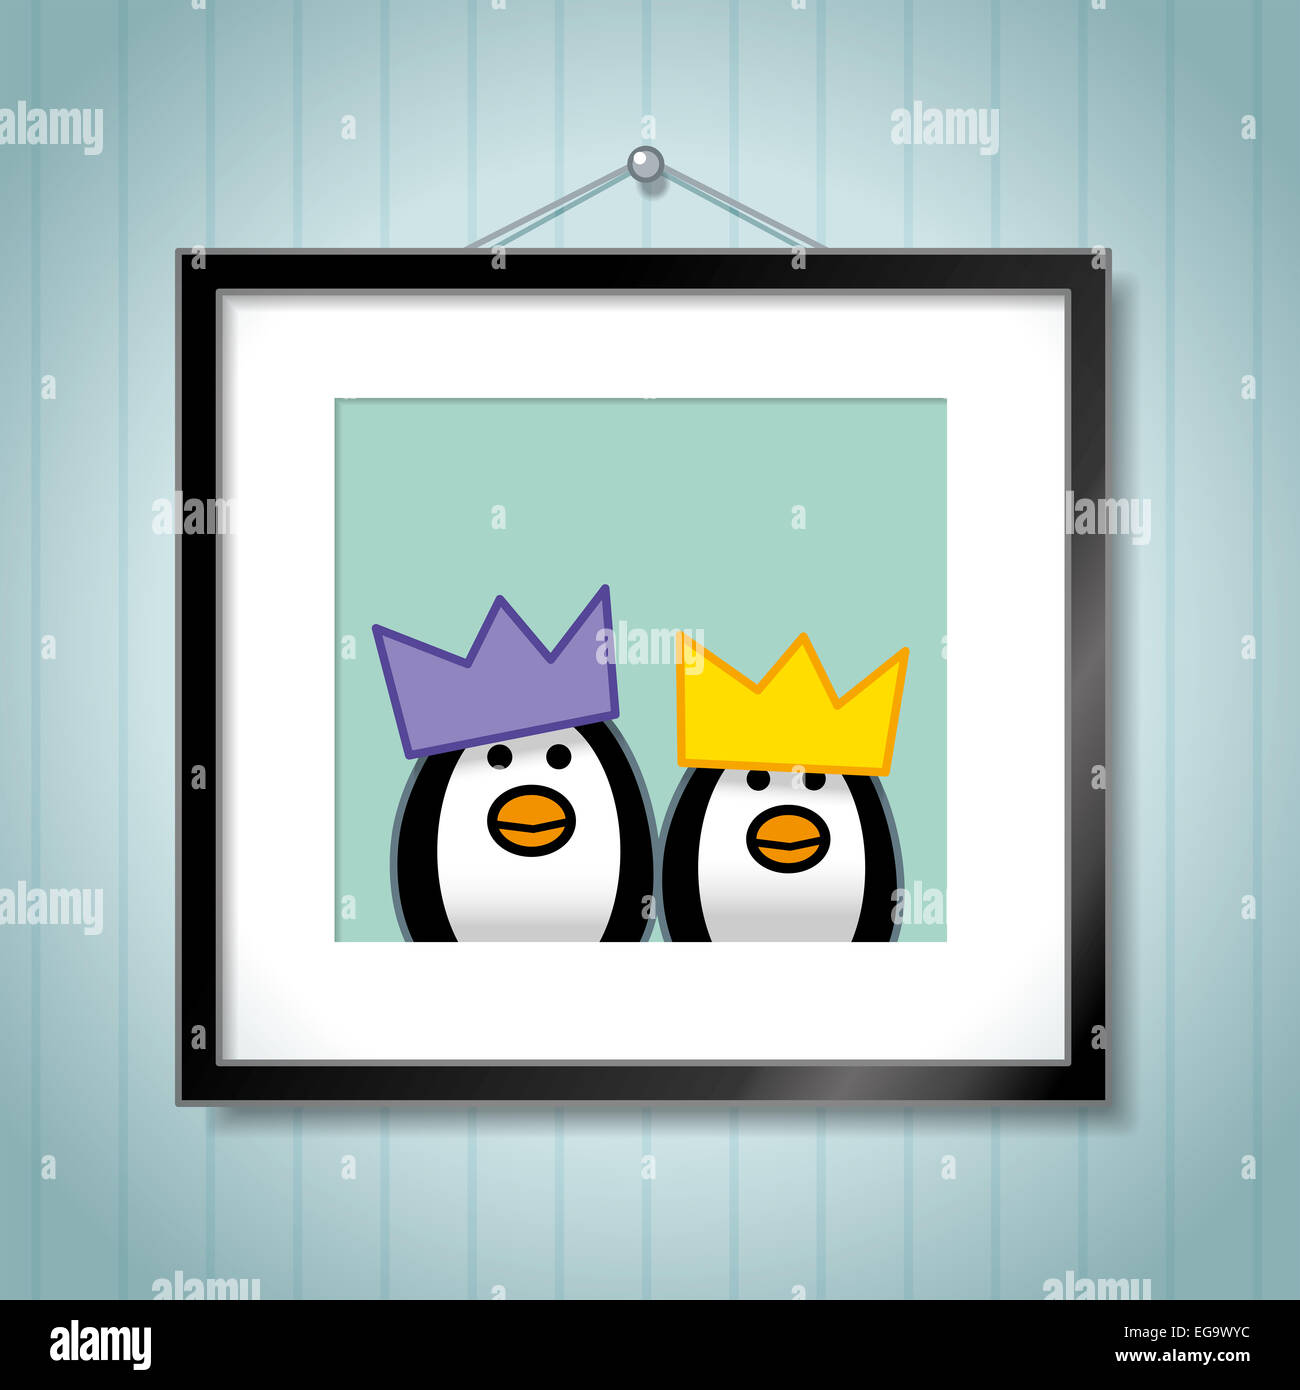 Cute Family of Penguins wearing Festive Party Hats in Picture Frames hanging on a Wallpaper Background Stock Photo